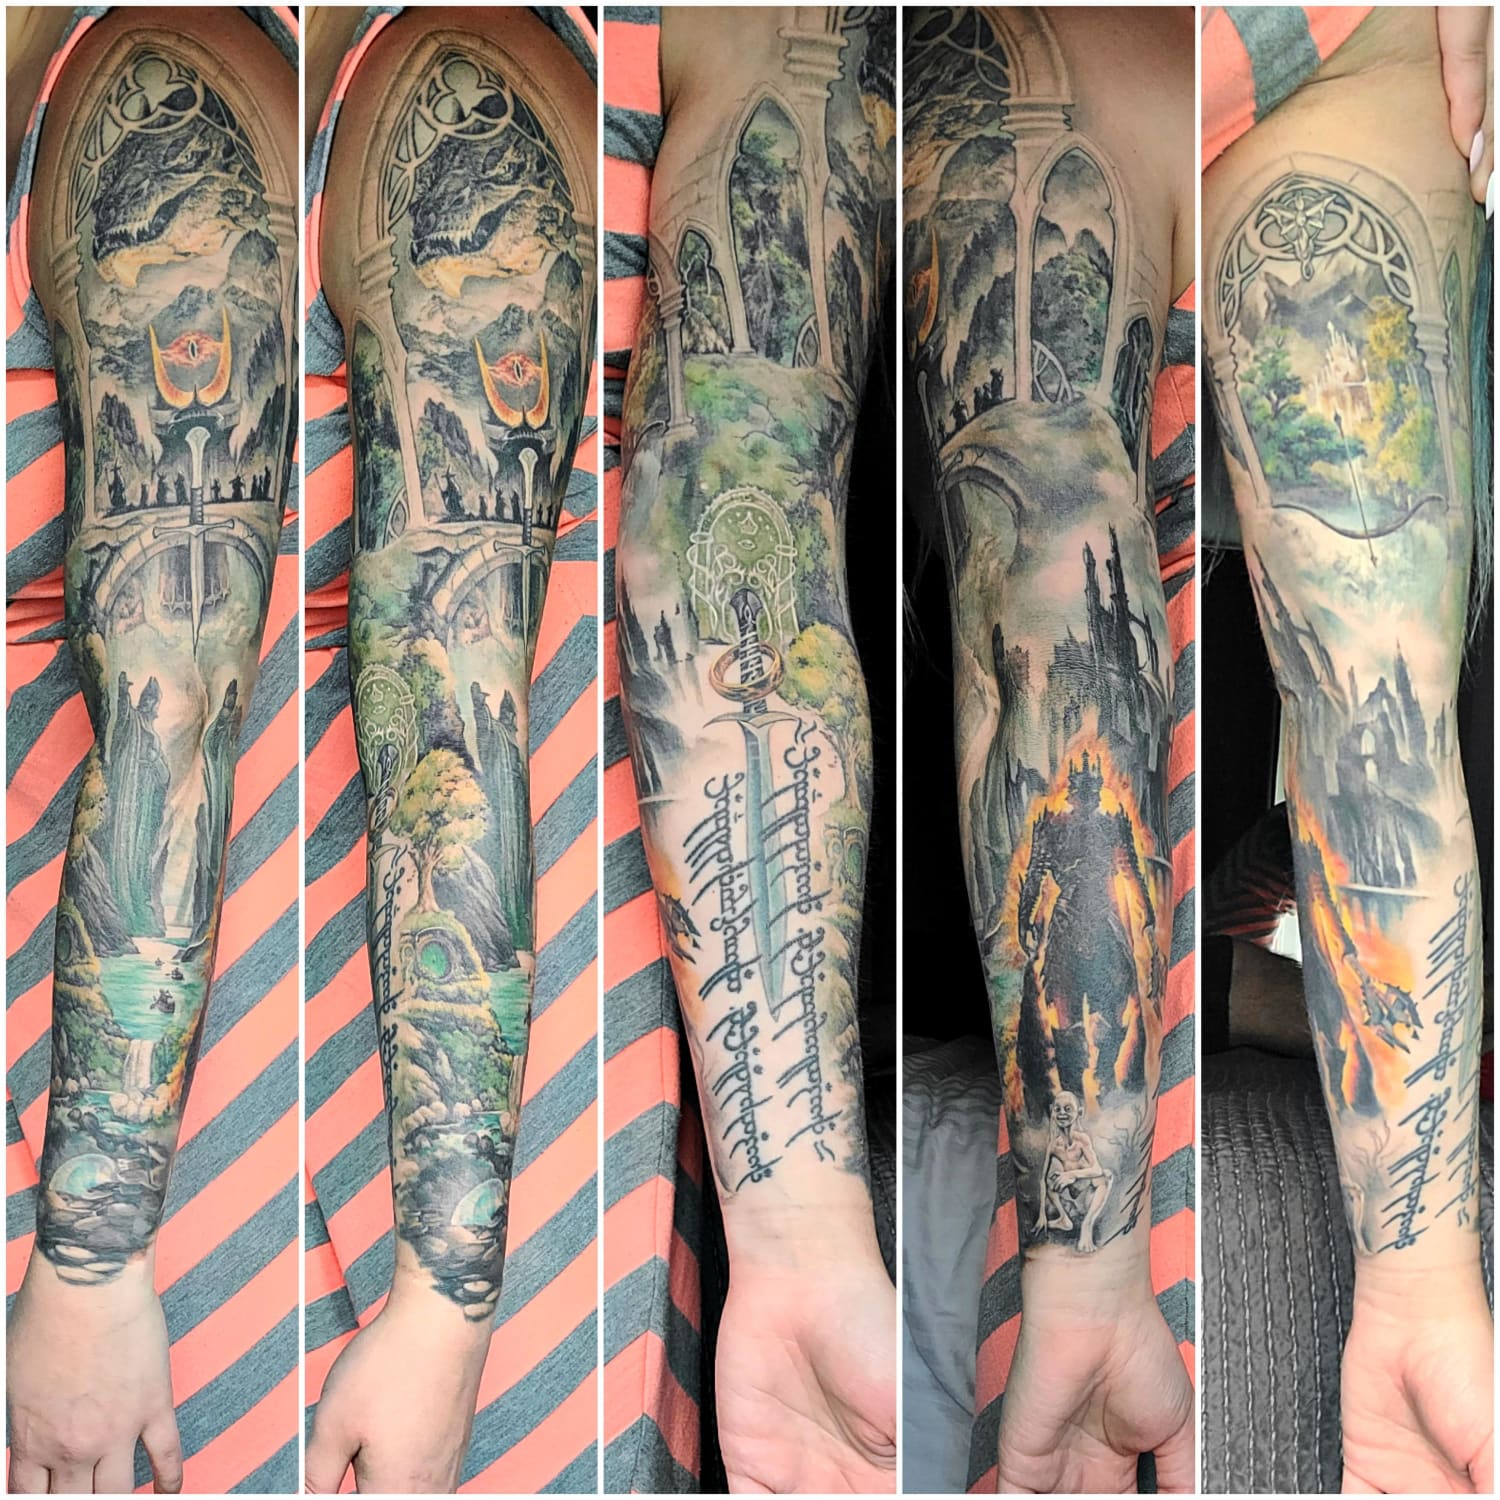 LOTR/Hobbit sleeve done by Kat at Mama Tried Tattoo in Saskatoon, SK